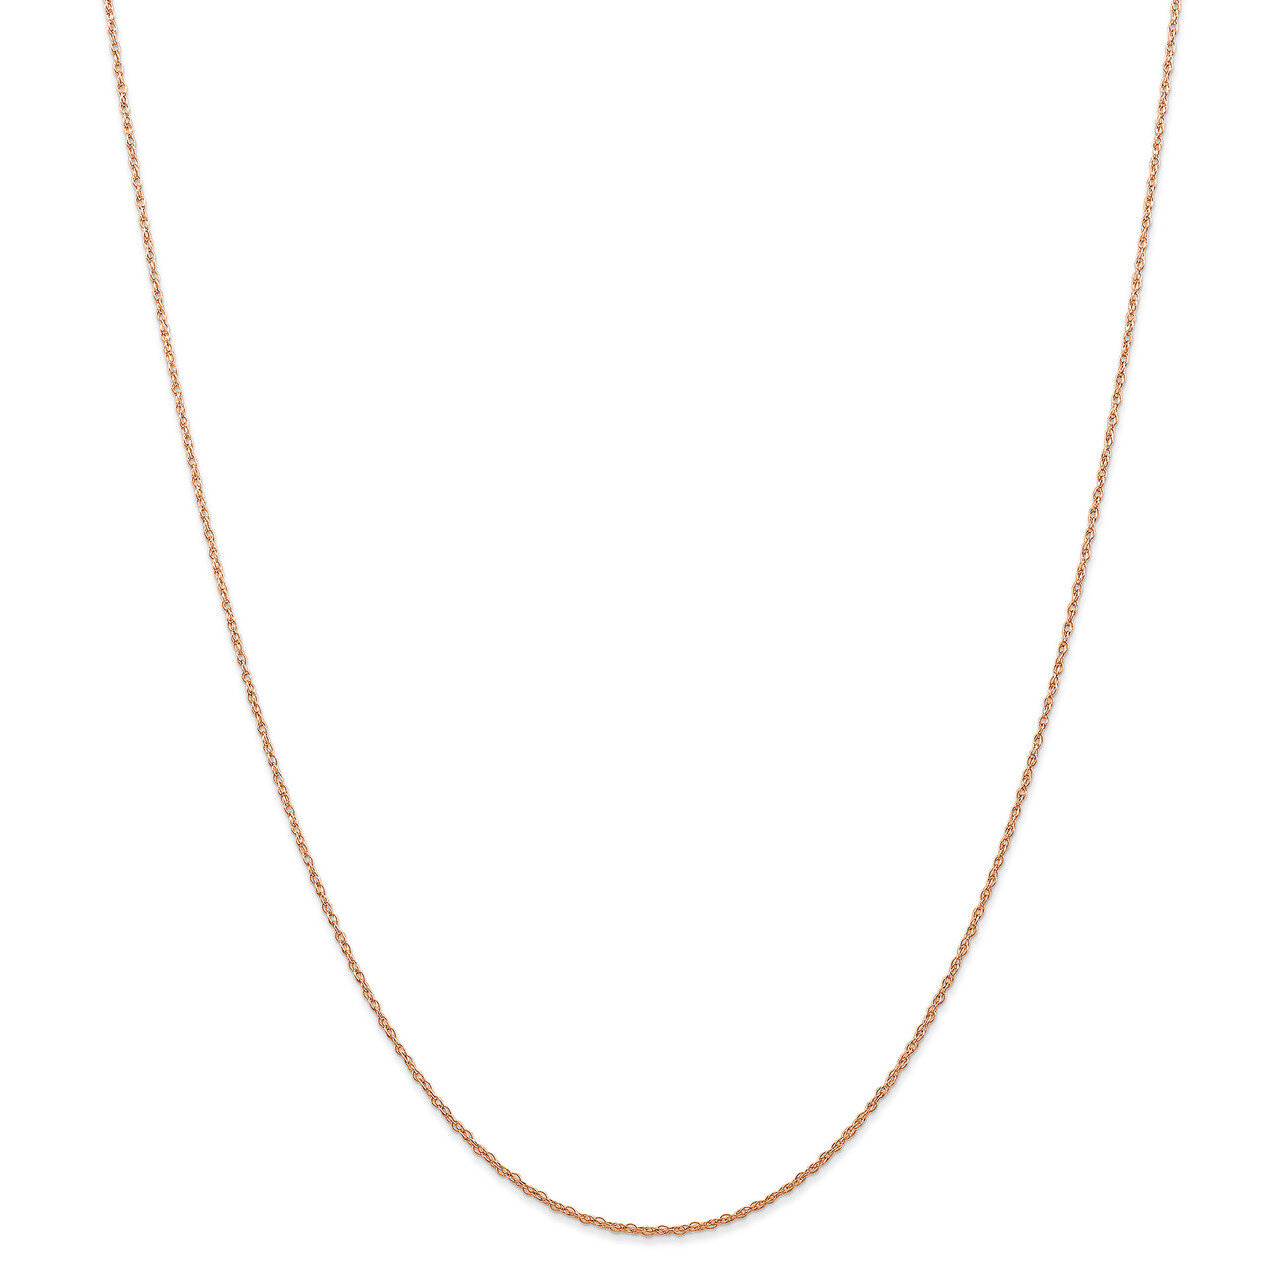 20 Inch 0.7 mm Carded Cable Rope Chain 14k Rose Gold 7RR-20